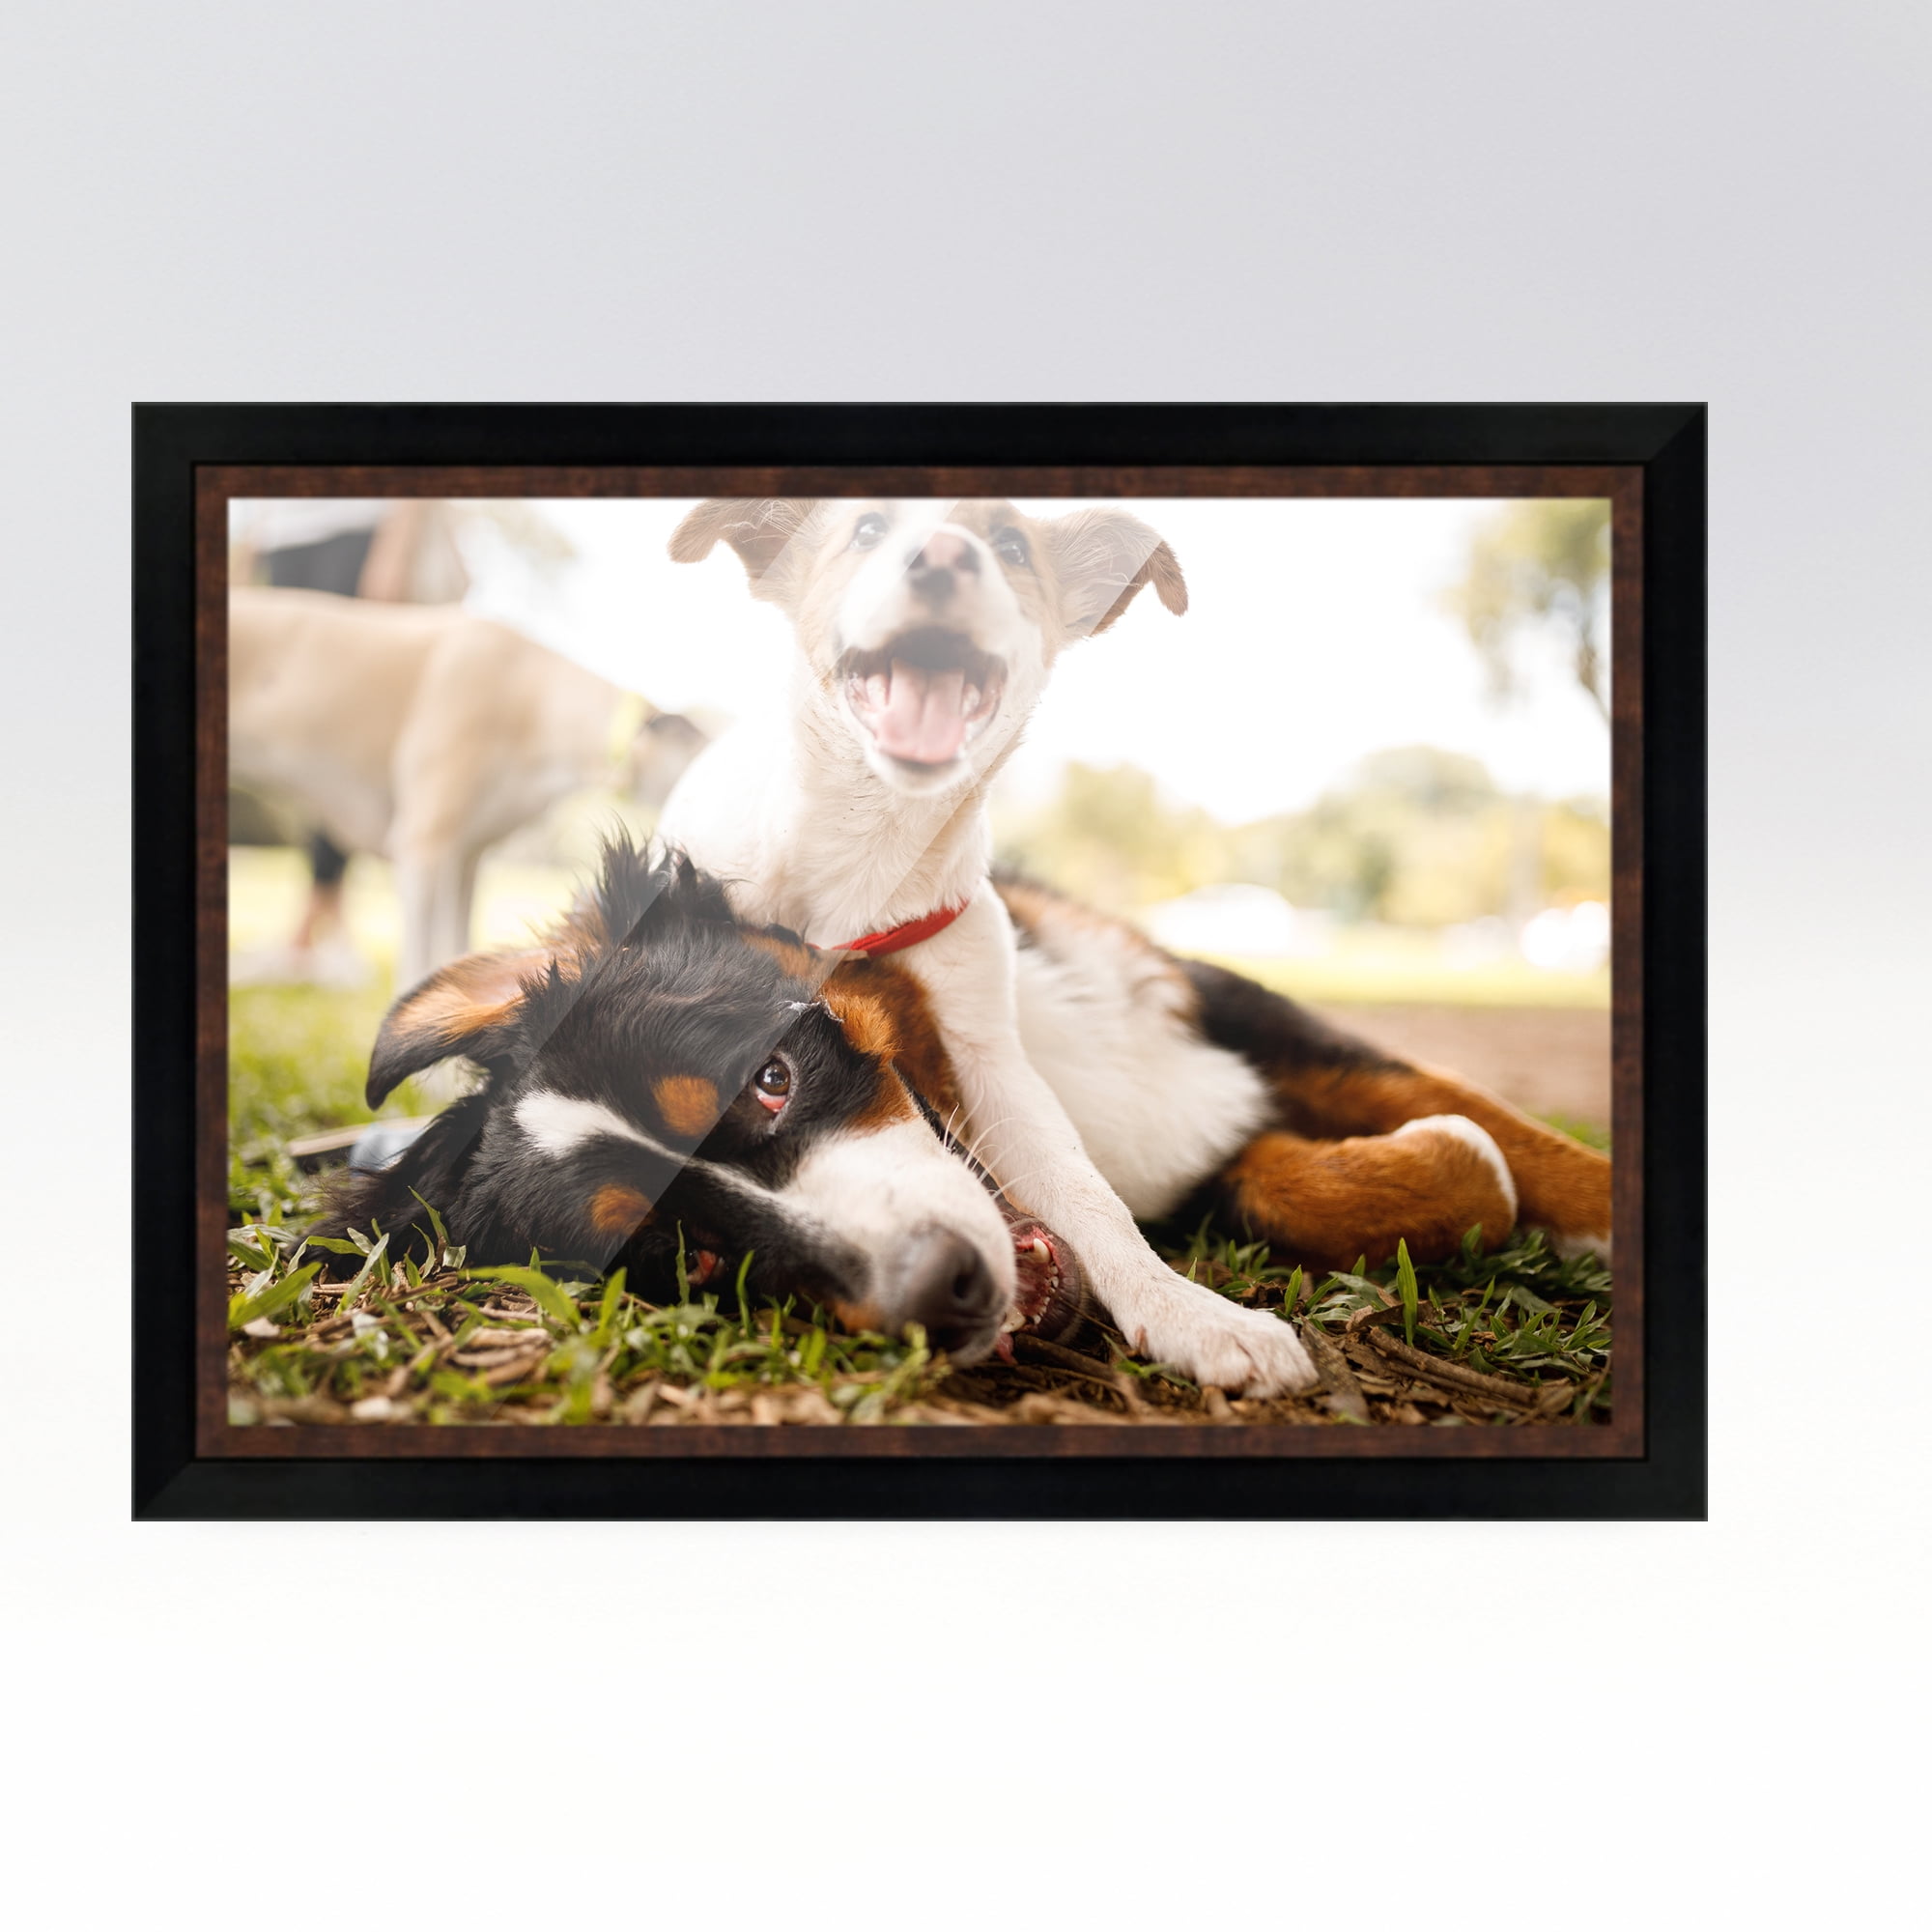 19.75x27.5 Puzzle Frame Kit with Glue Sheets | White Mid Century Picture  Frame | Real Wood with UV Resistant Acrylic Front | Made to Preserve and